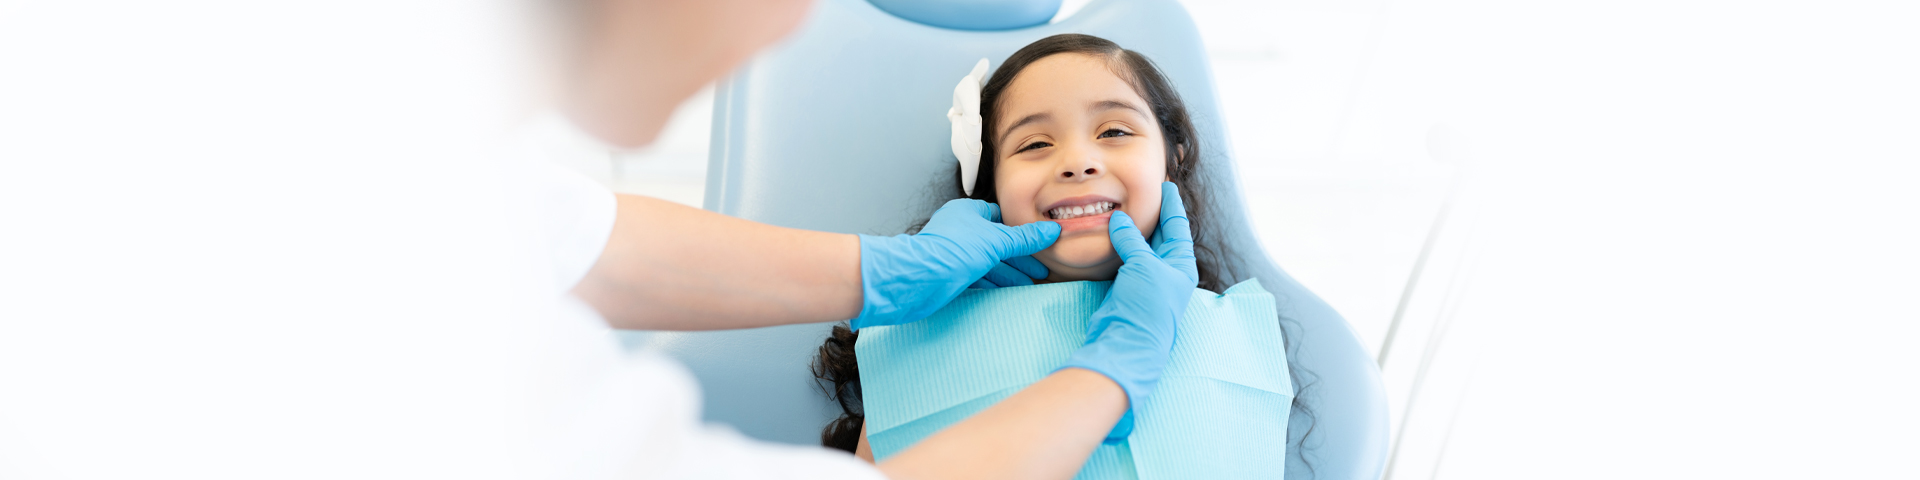 Do Your Children Have Dental Anxiety?